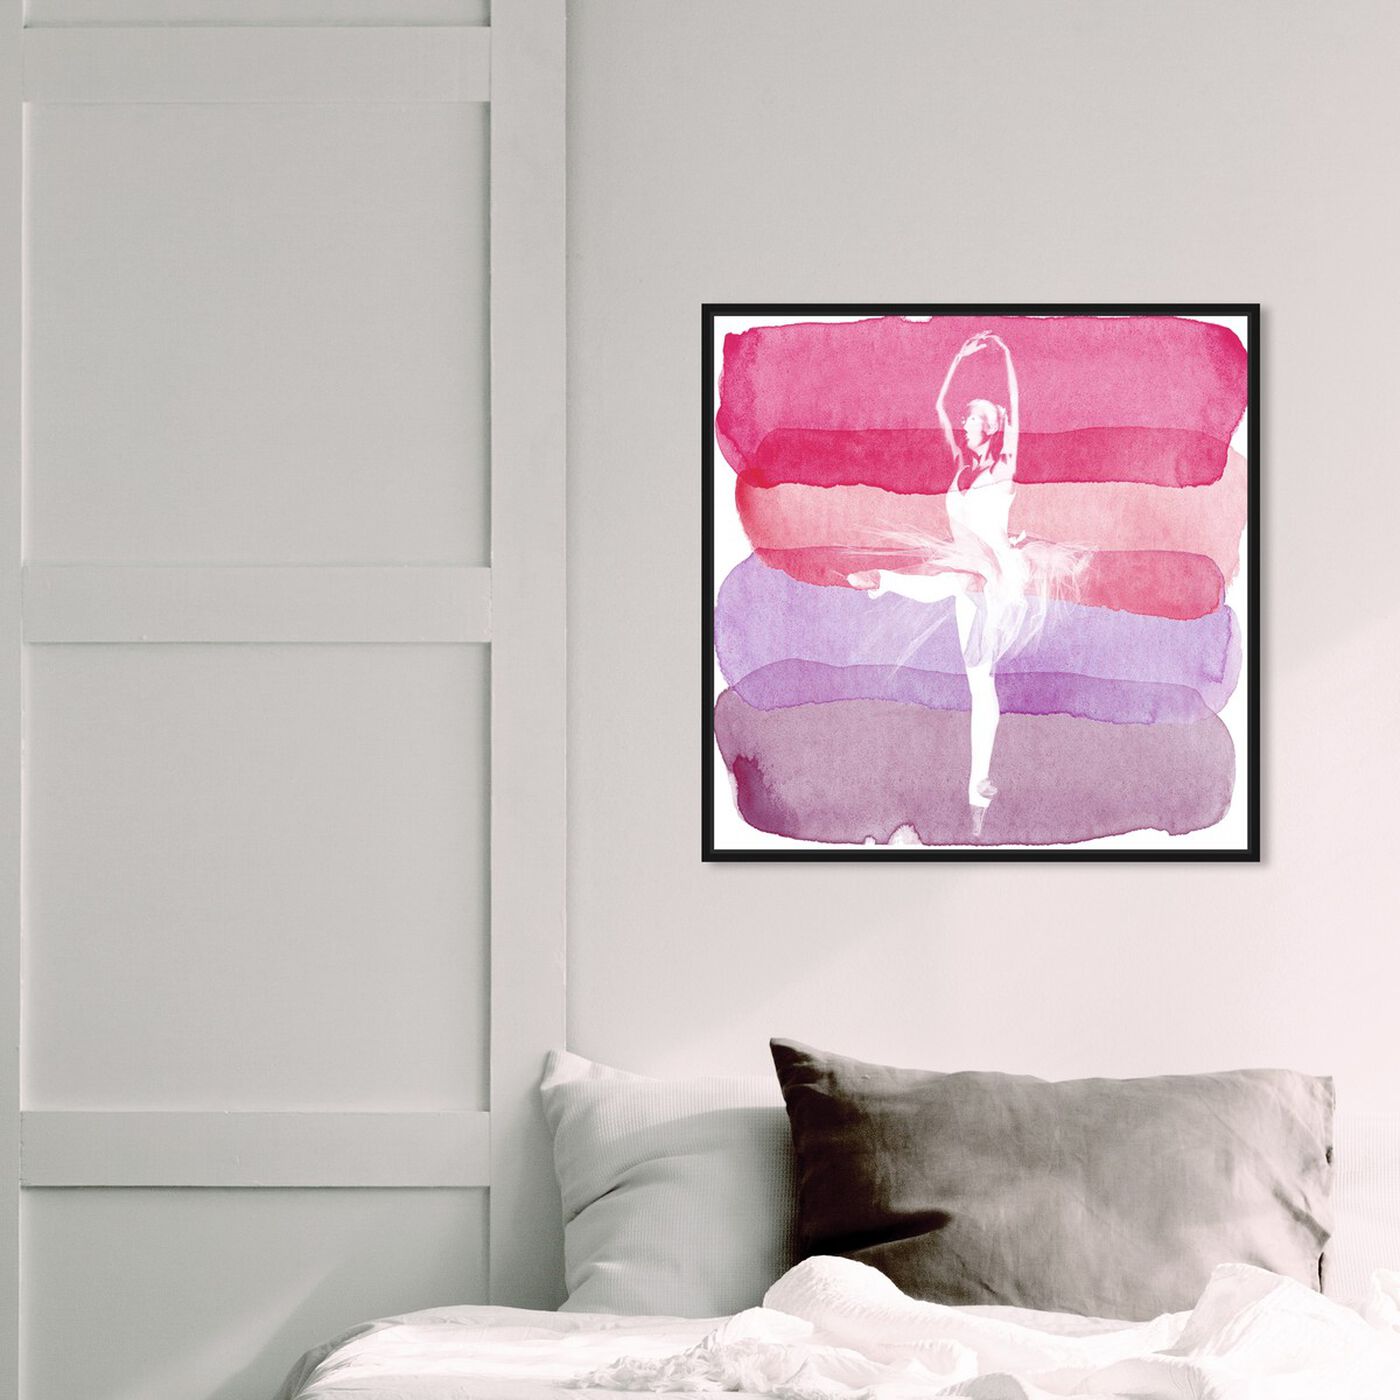 Hanging view of Petal Ballerina Two featuring sports and teams and ballet art.